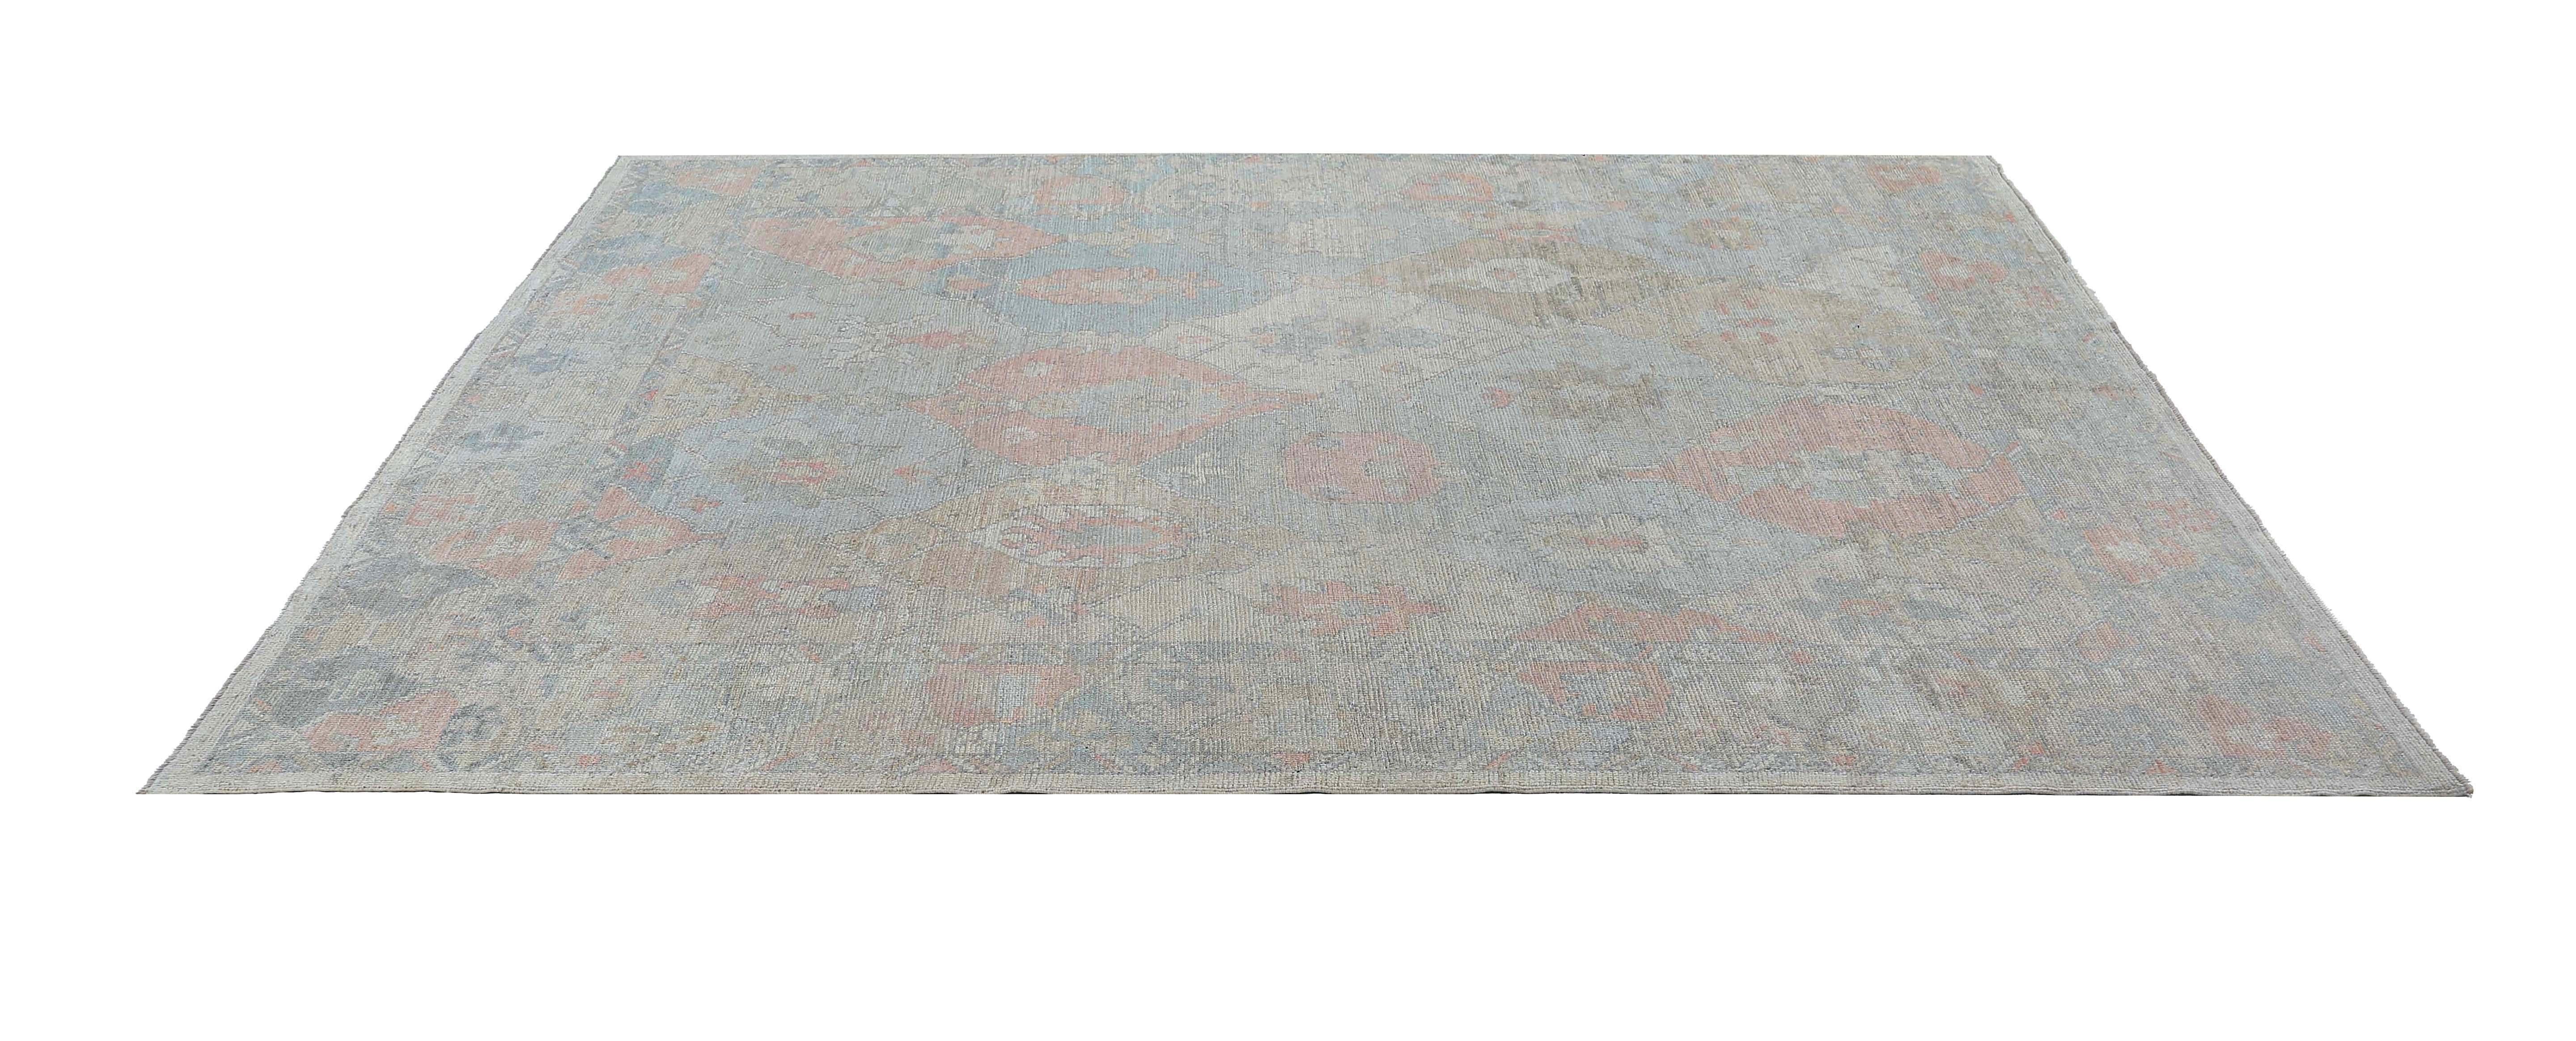 Add a touch of elegance and charm to your home decor with this beautiful Turkish Oushak rug. The rug measures 8'0